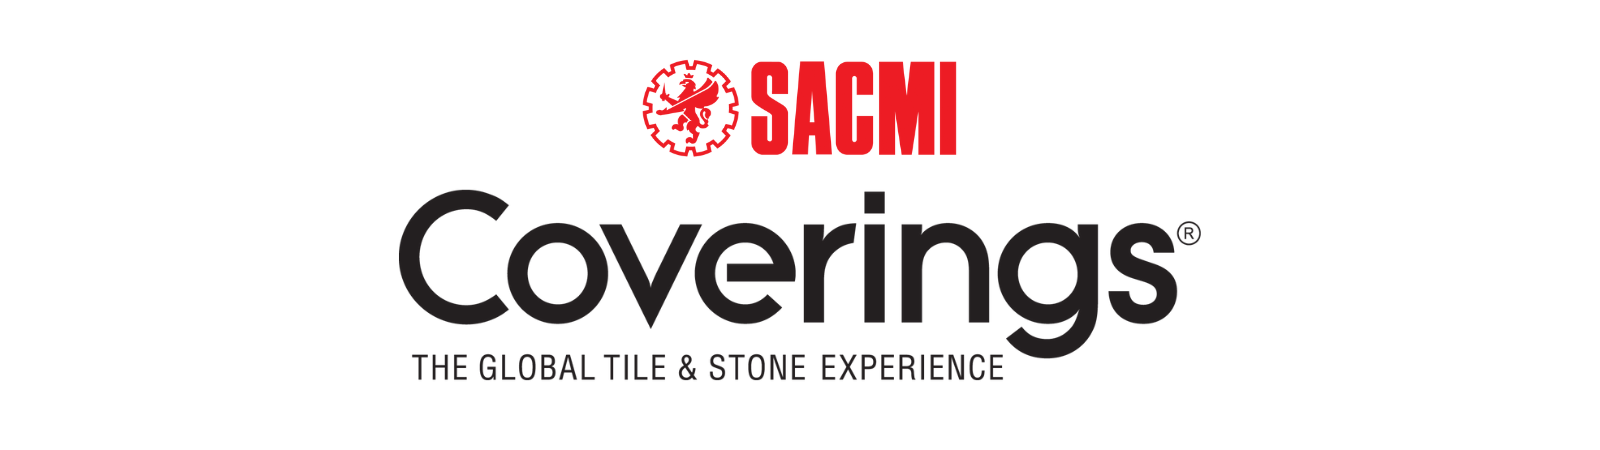 Digital, advanced, sustainable: SACMI ceramic plants take center-stage at Coverings